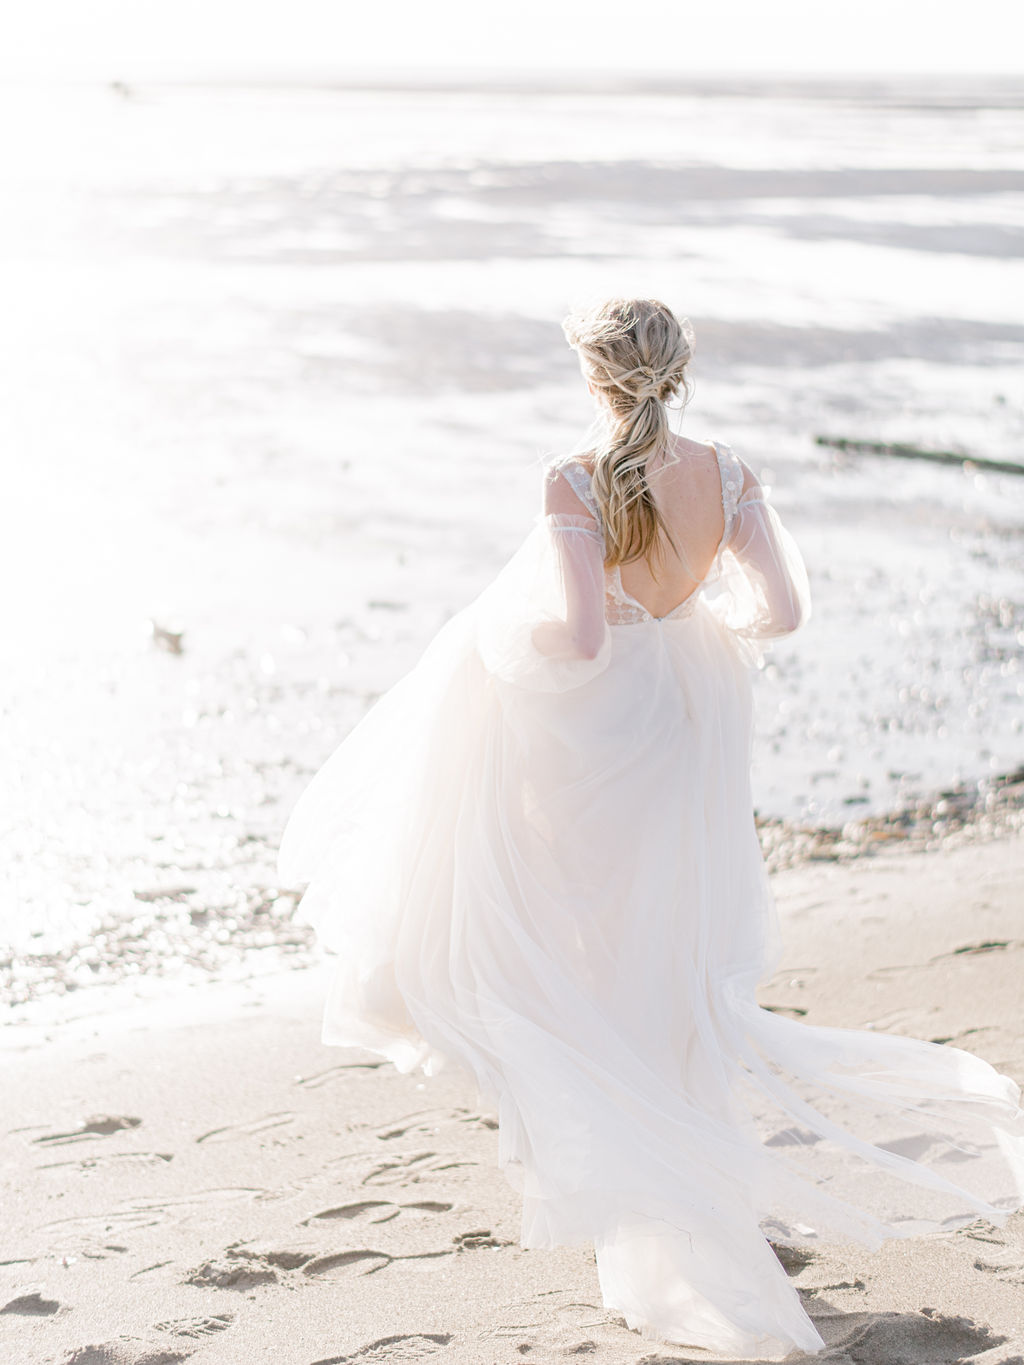 Romantic wedding portraits on the beach in Vancouver, British Columbia; Fine art wedding inspiration with a flowy beach wedding dress with poofy sheer sleeves, beach wedding attire, beach bridal style, bride hair and makeup ideas, low bridal ponytail for an intimate wedding